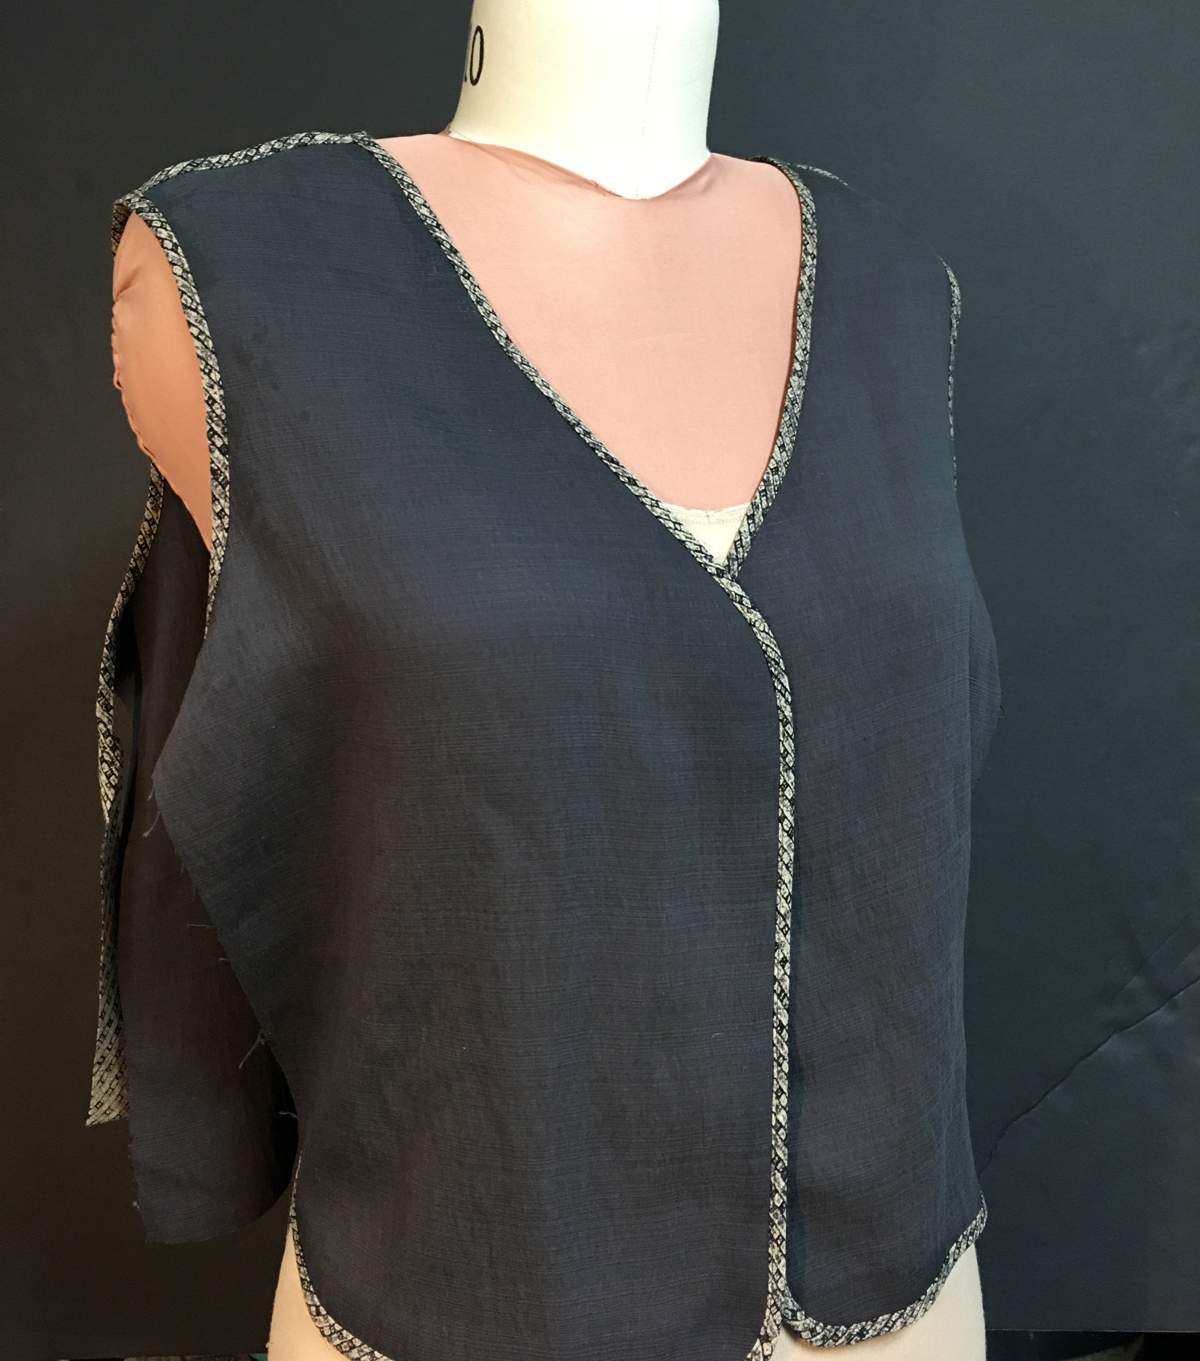 Unfinished gray vest on dress form showing bound front and neckline edge